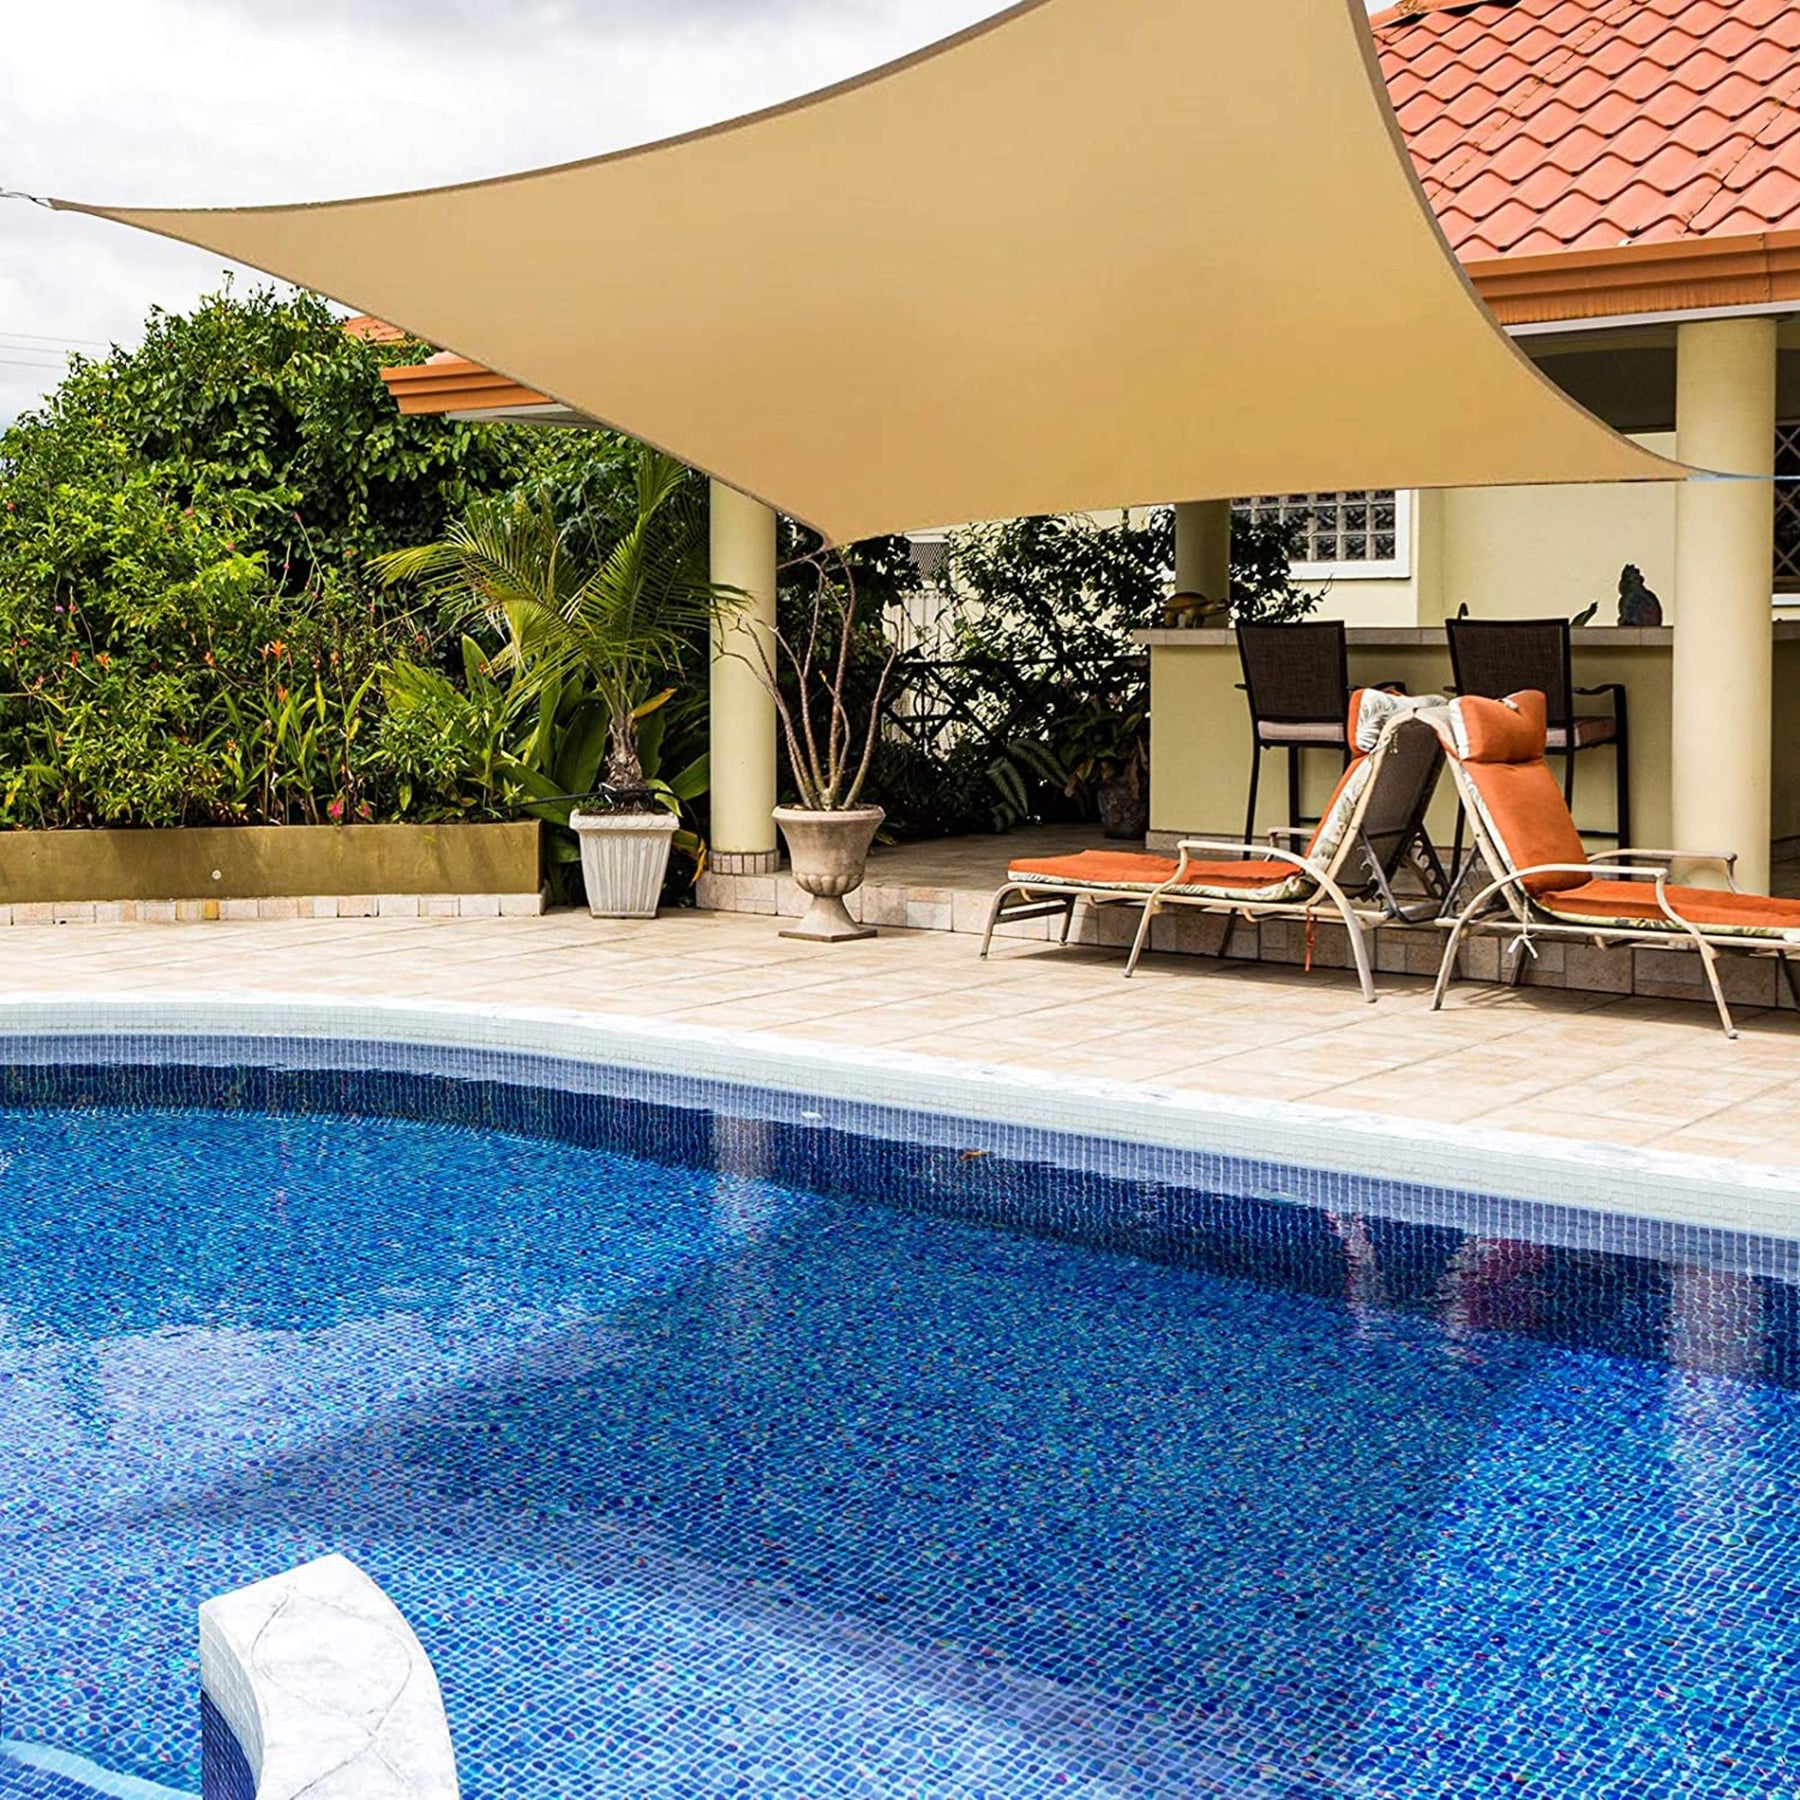 Create a Refreshing Oasis with Our Heavy Duty Sunshade Sail Canopy